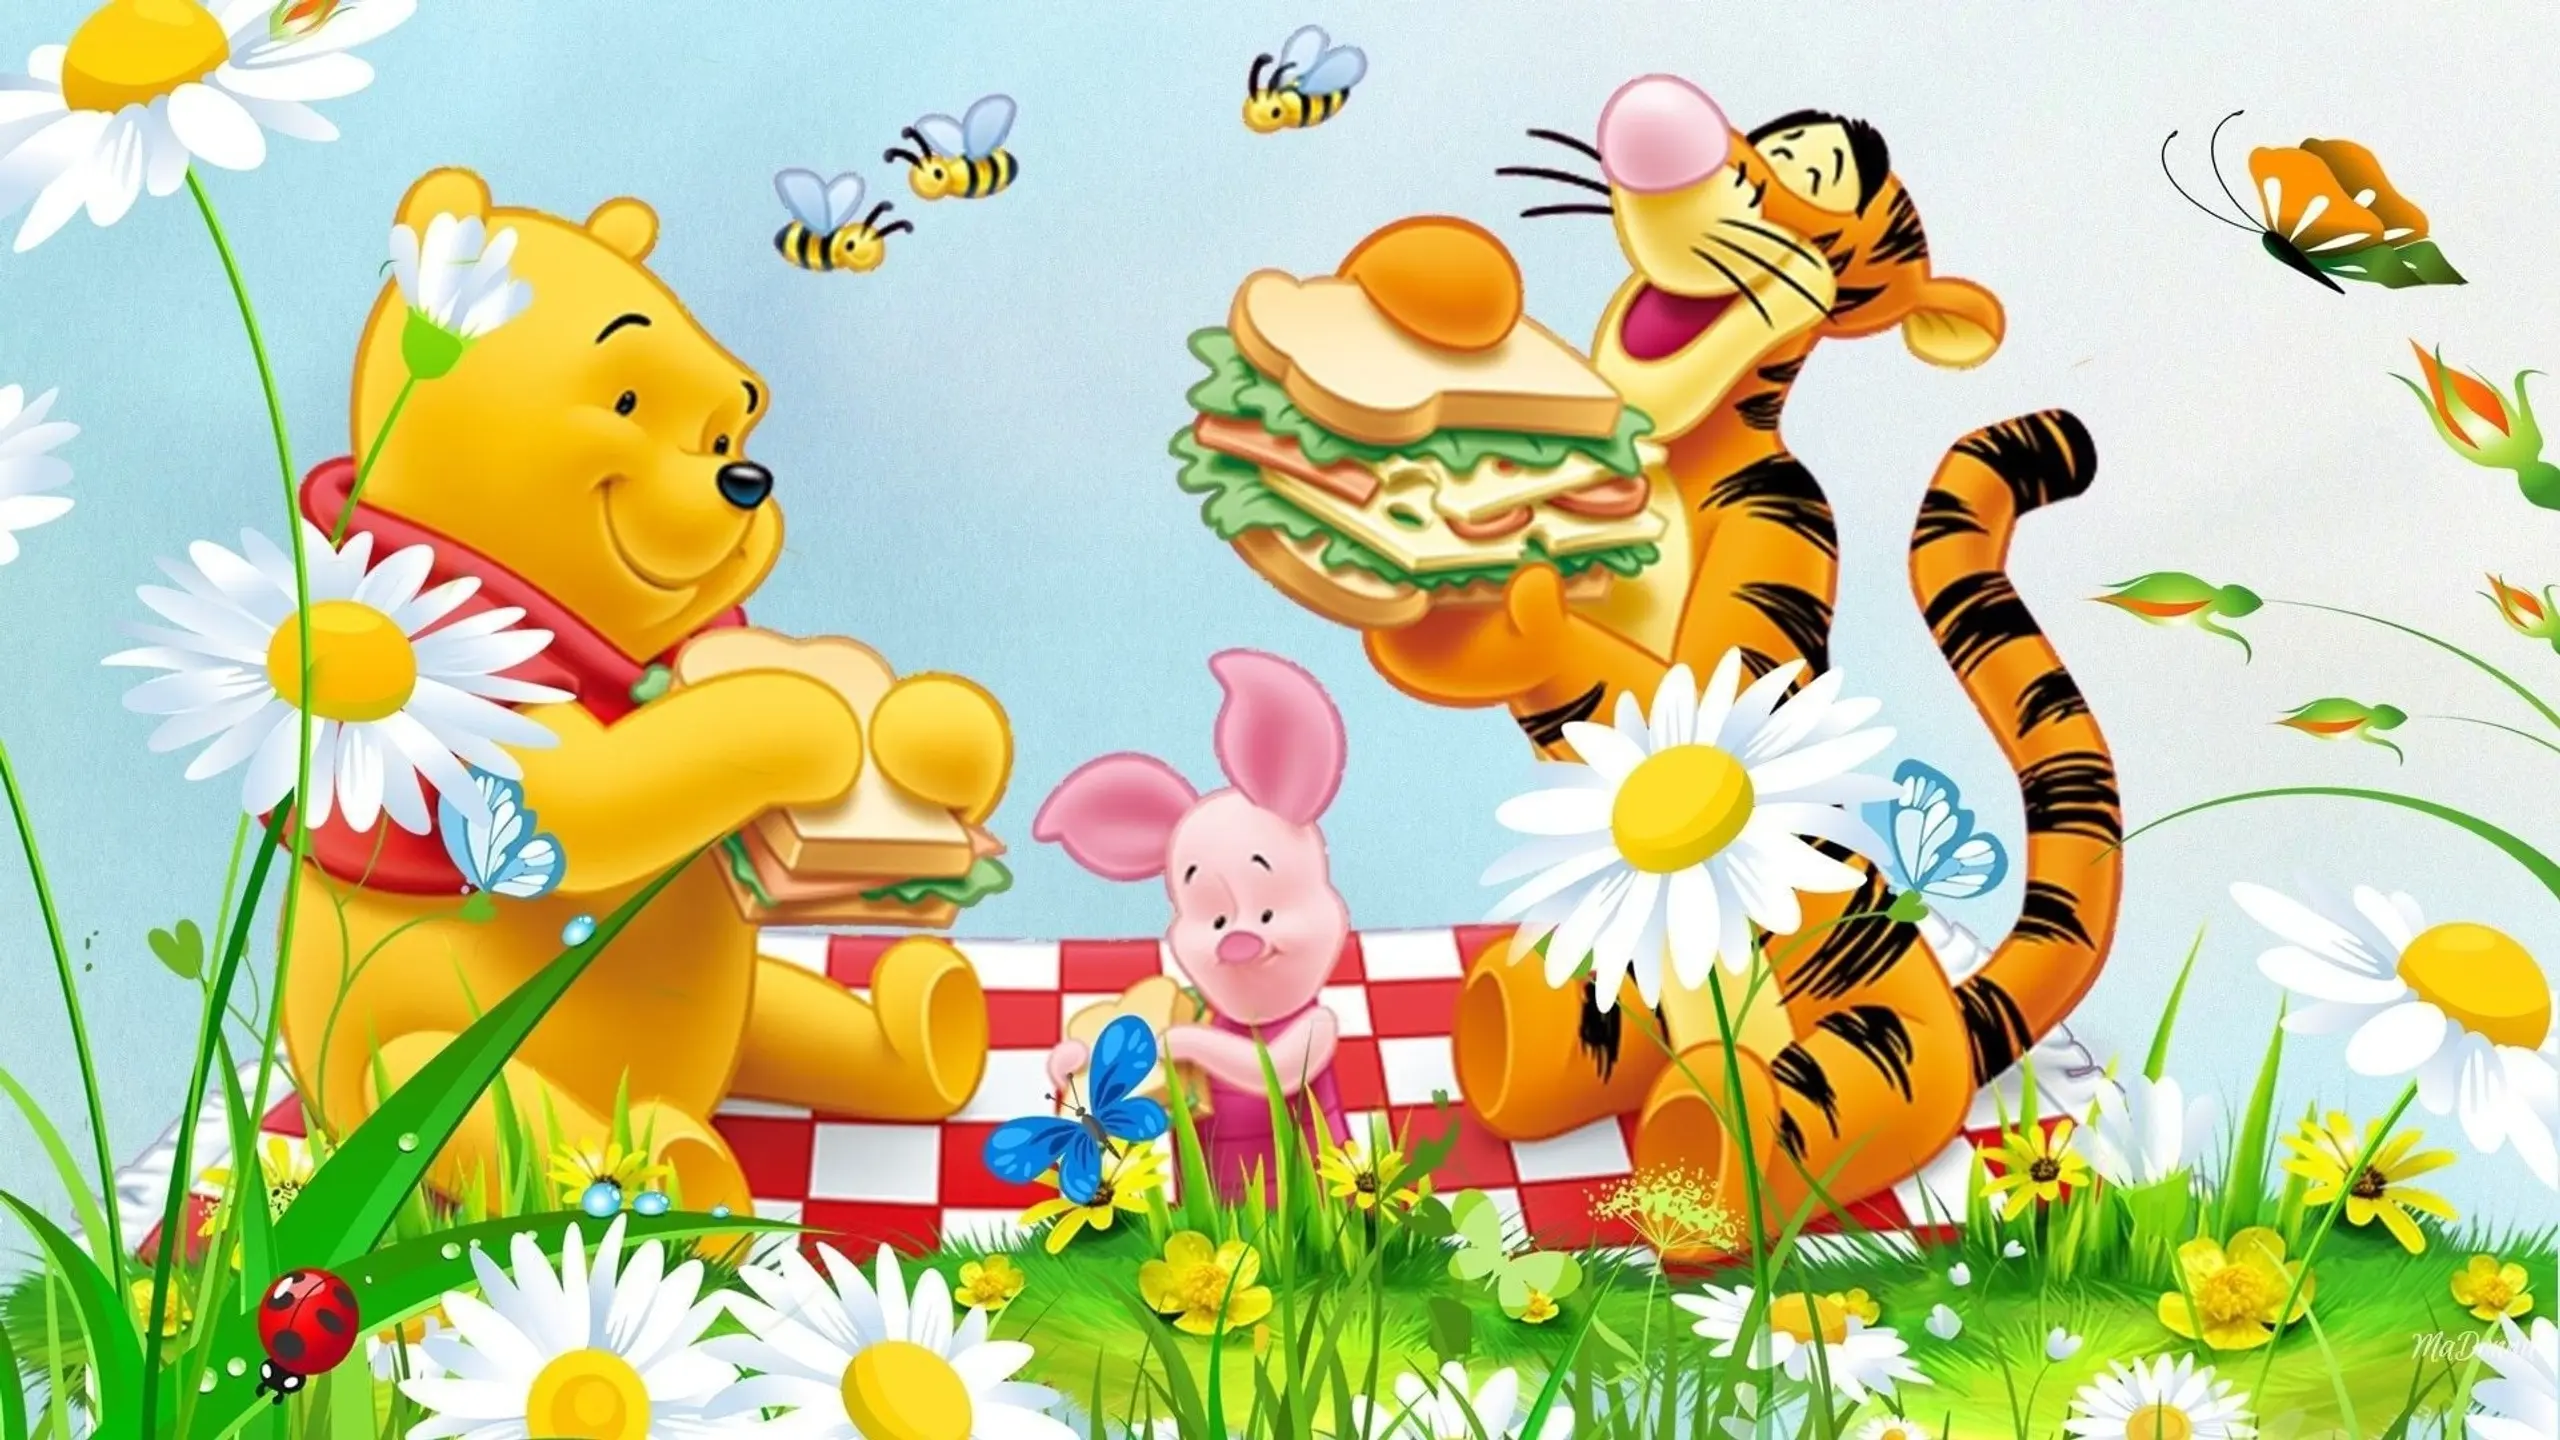 The Magical World of Winnie the Pooh: A Great Day of Discovery